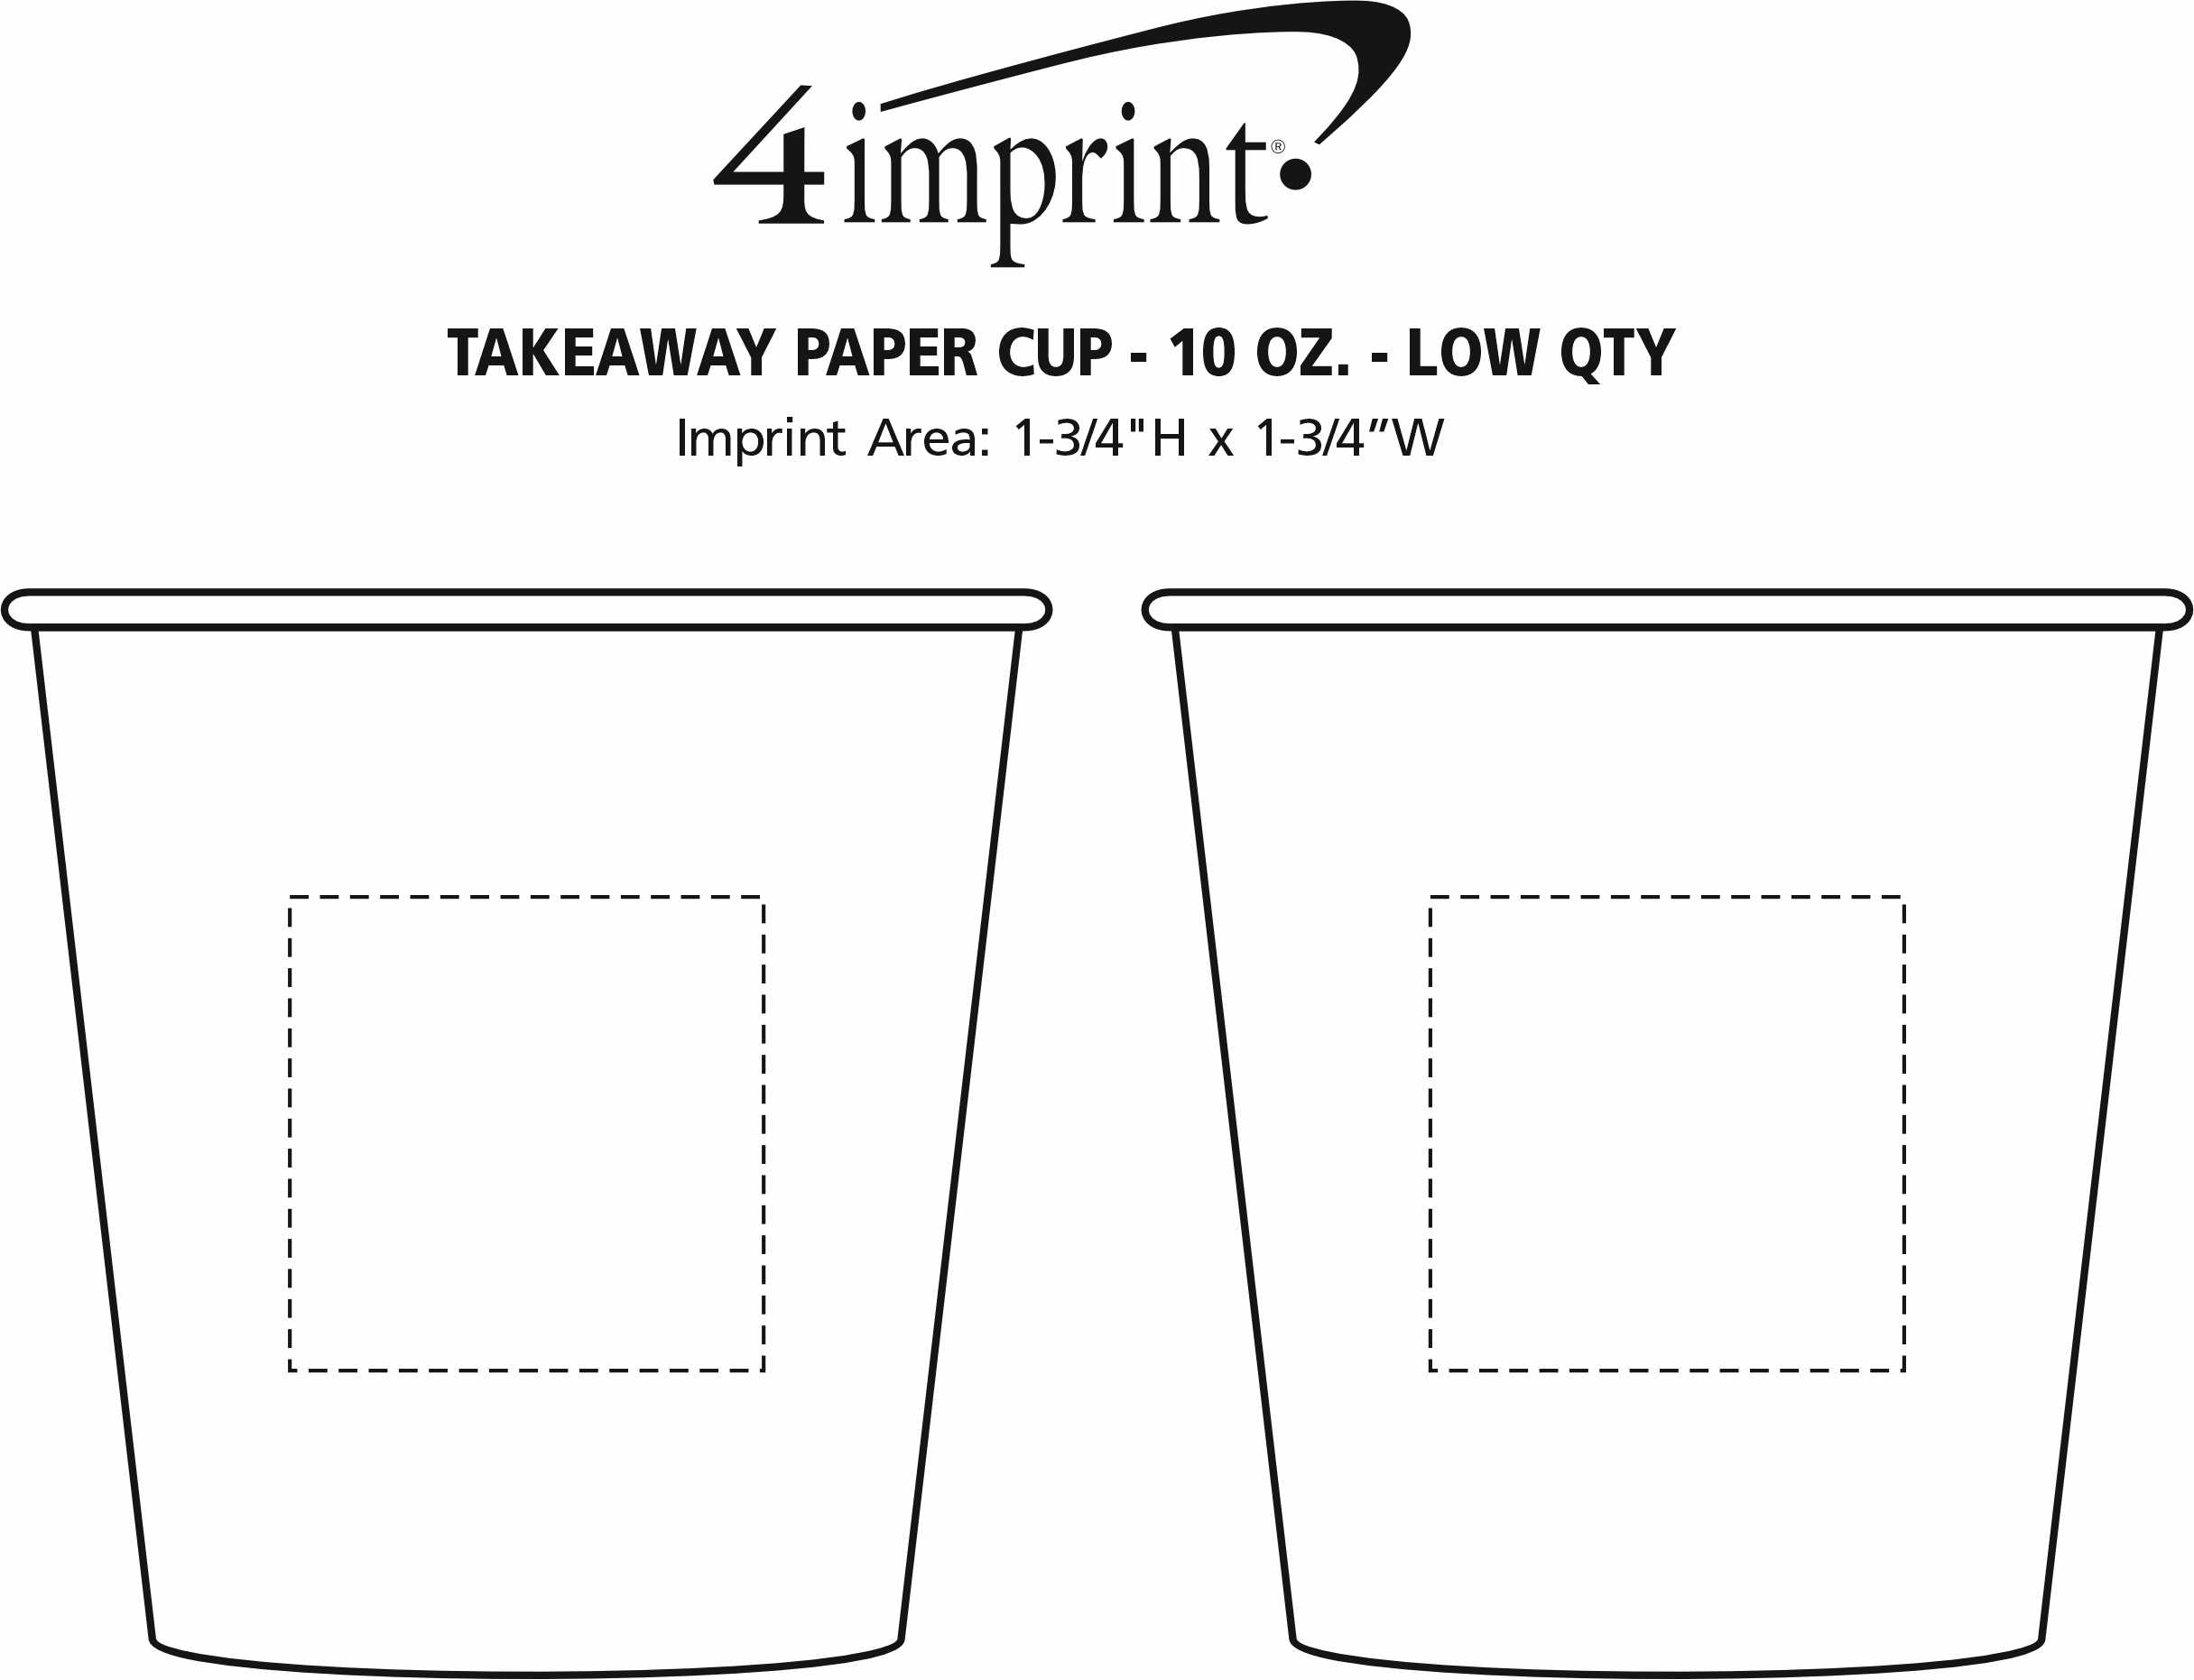 Imprint Area of Takeaway Paper Cup - 10 oz. - Low Qty